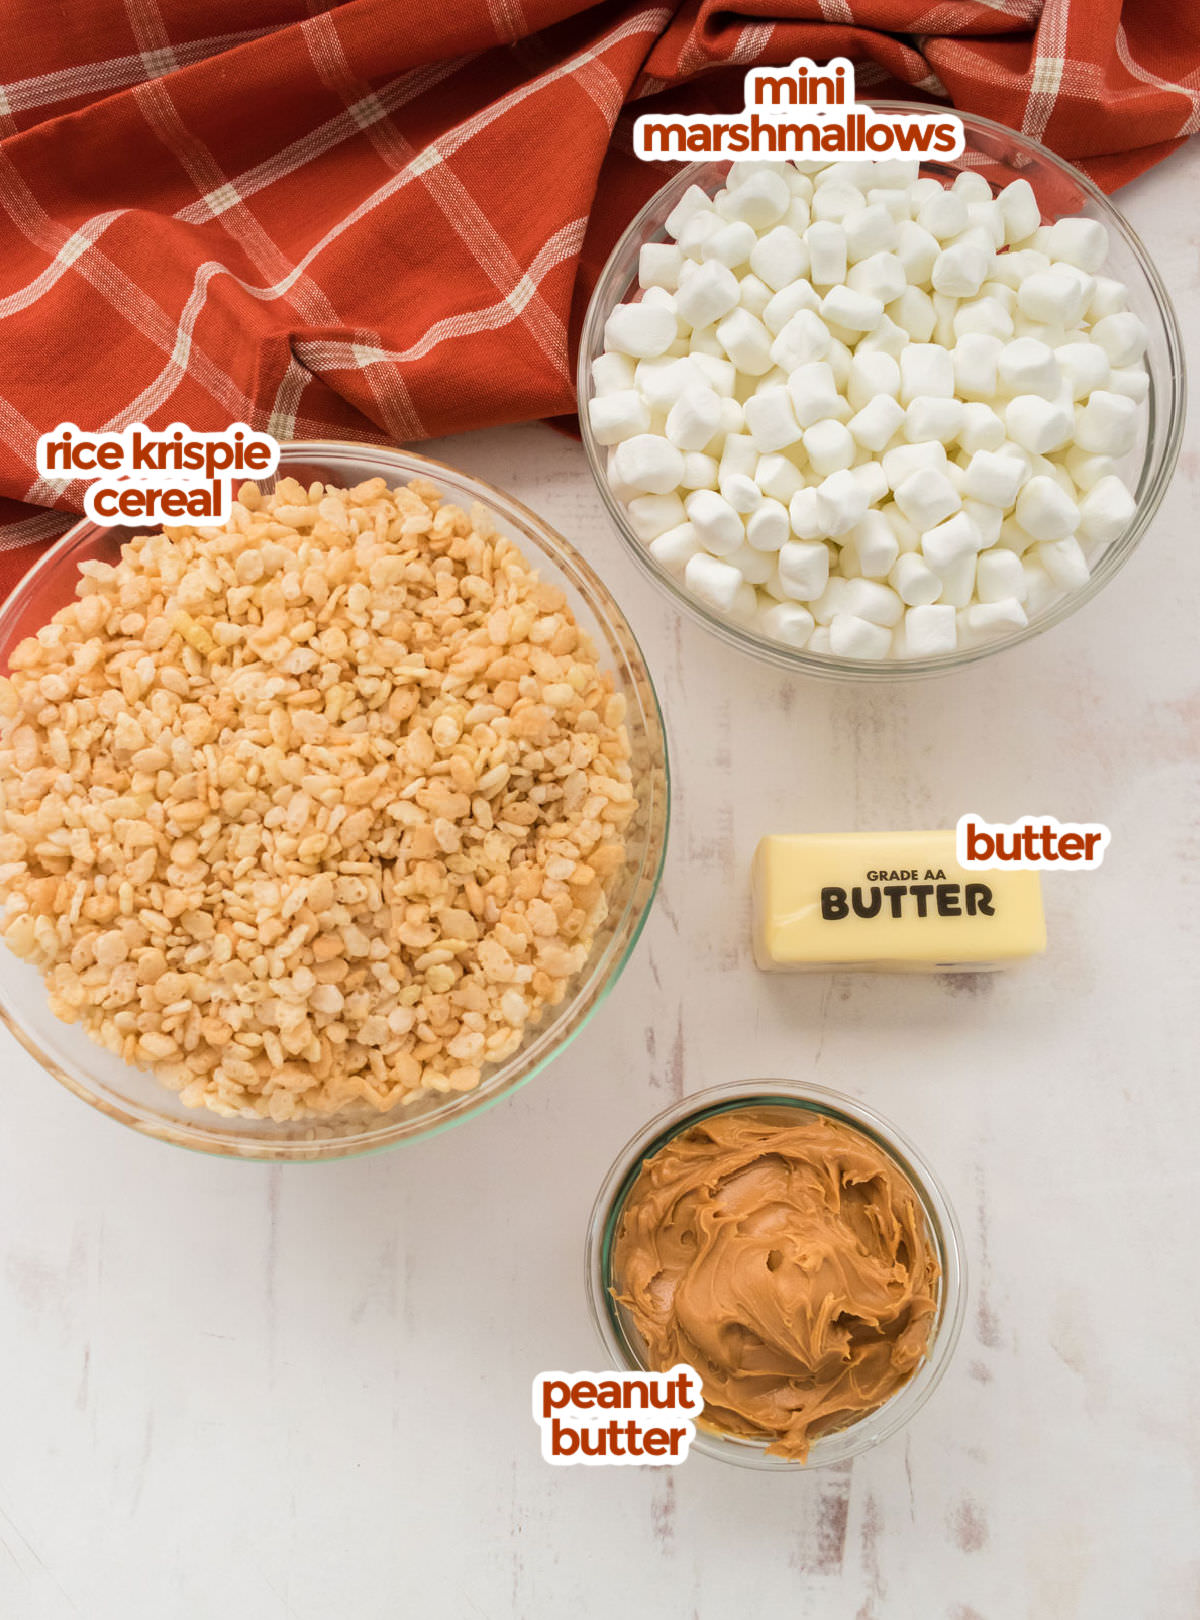 All the ingredients you will need to make Peanut Butter Rice Krispie Treats including Mini Marshmallows, Rice Krispie Cereal, Butter and Peanut Butter.